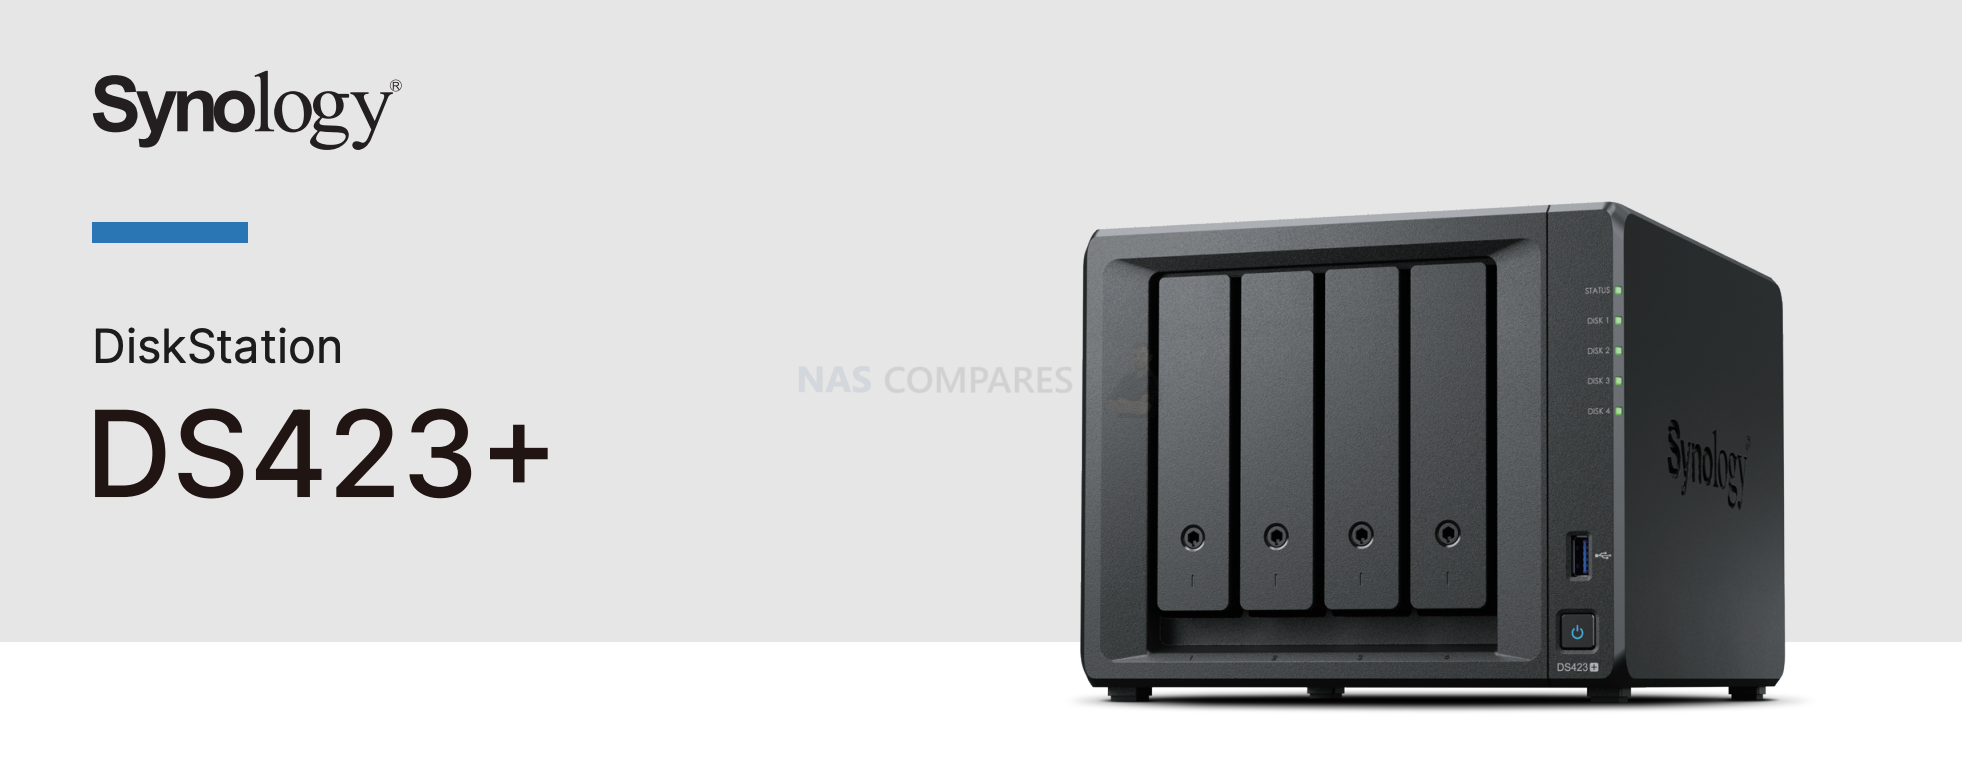 Synology DiskStation DS423: A versatile NAS solution for homes and